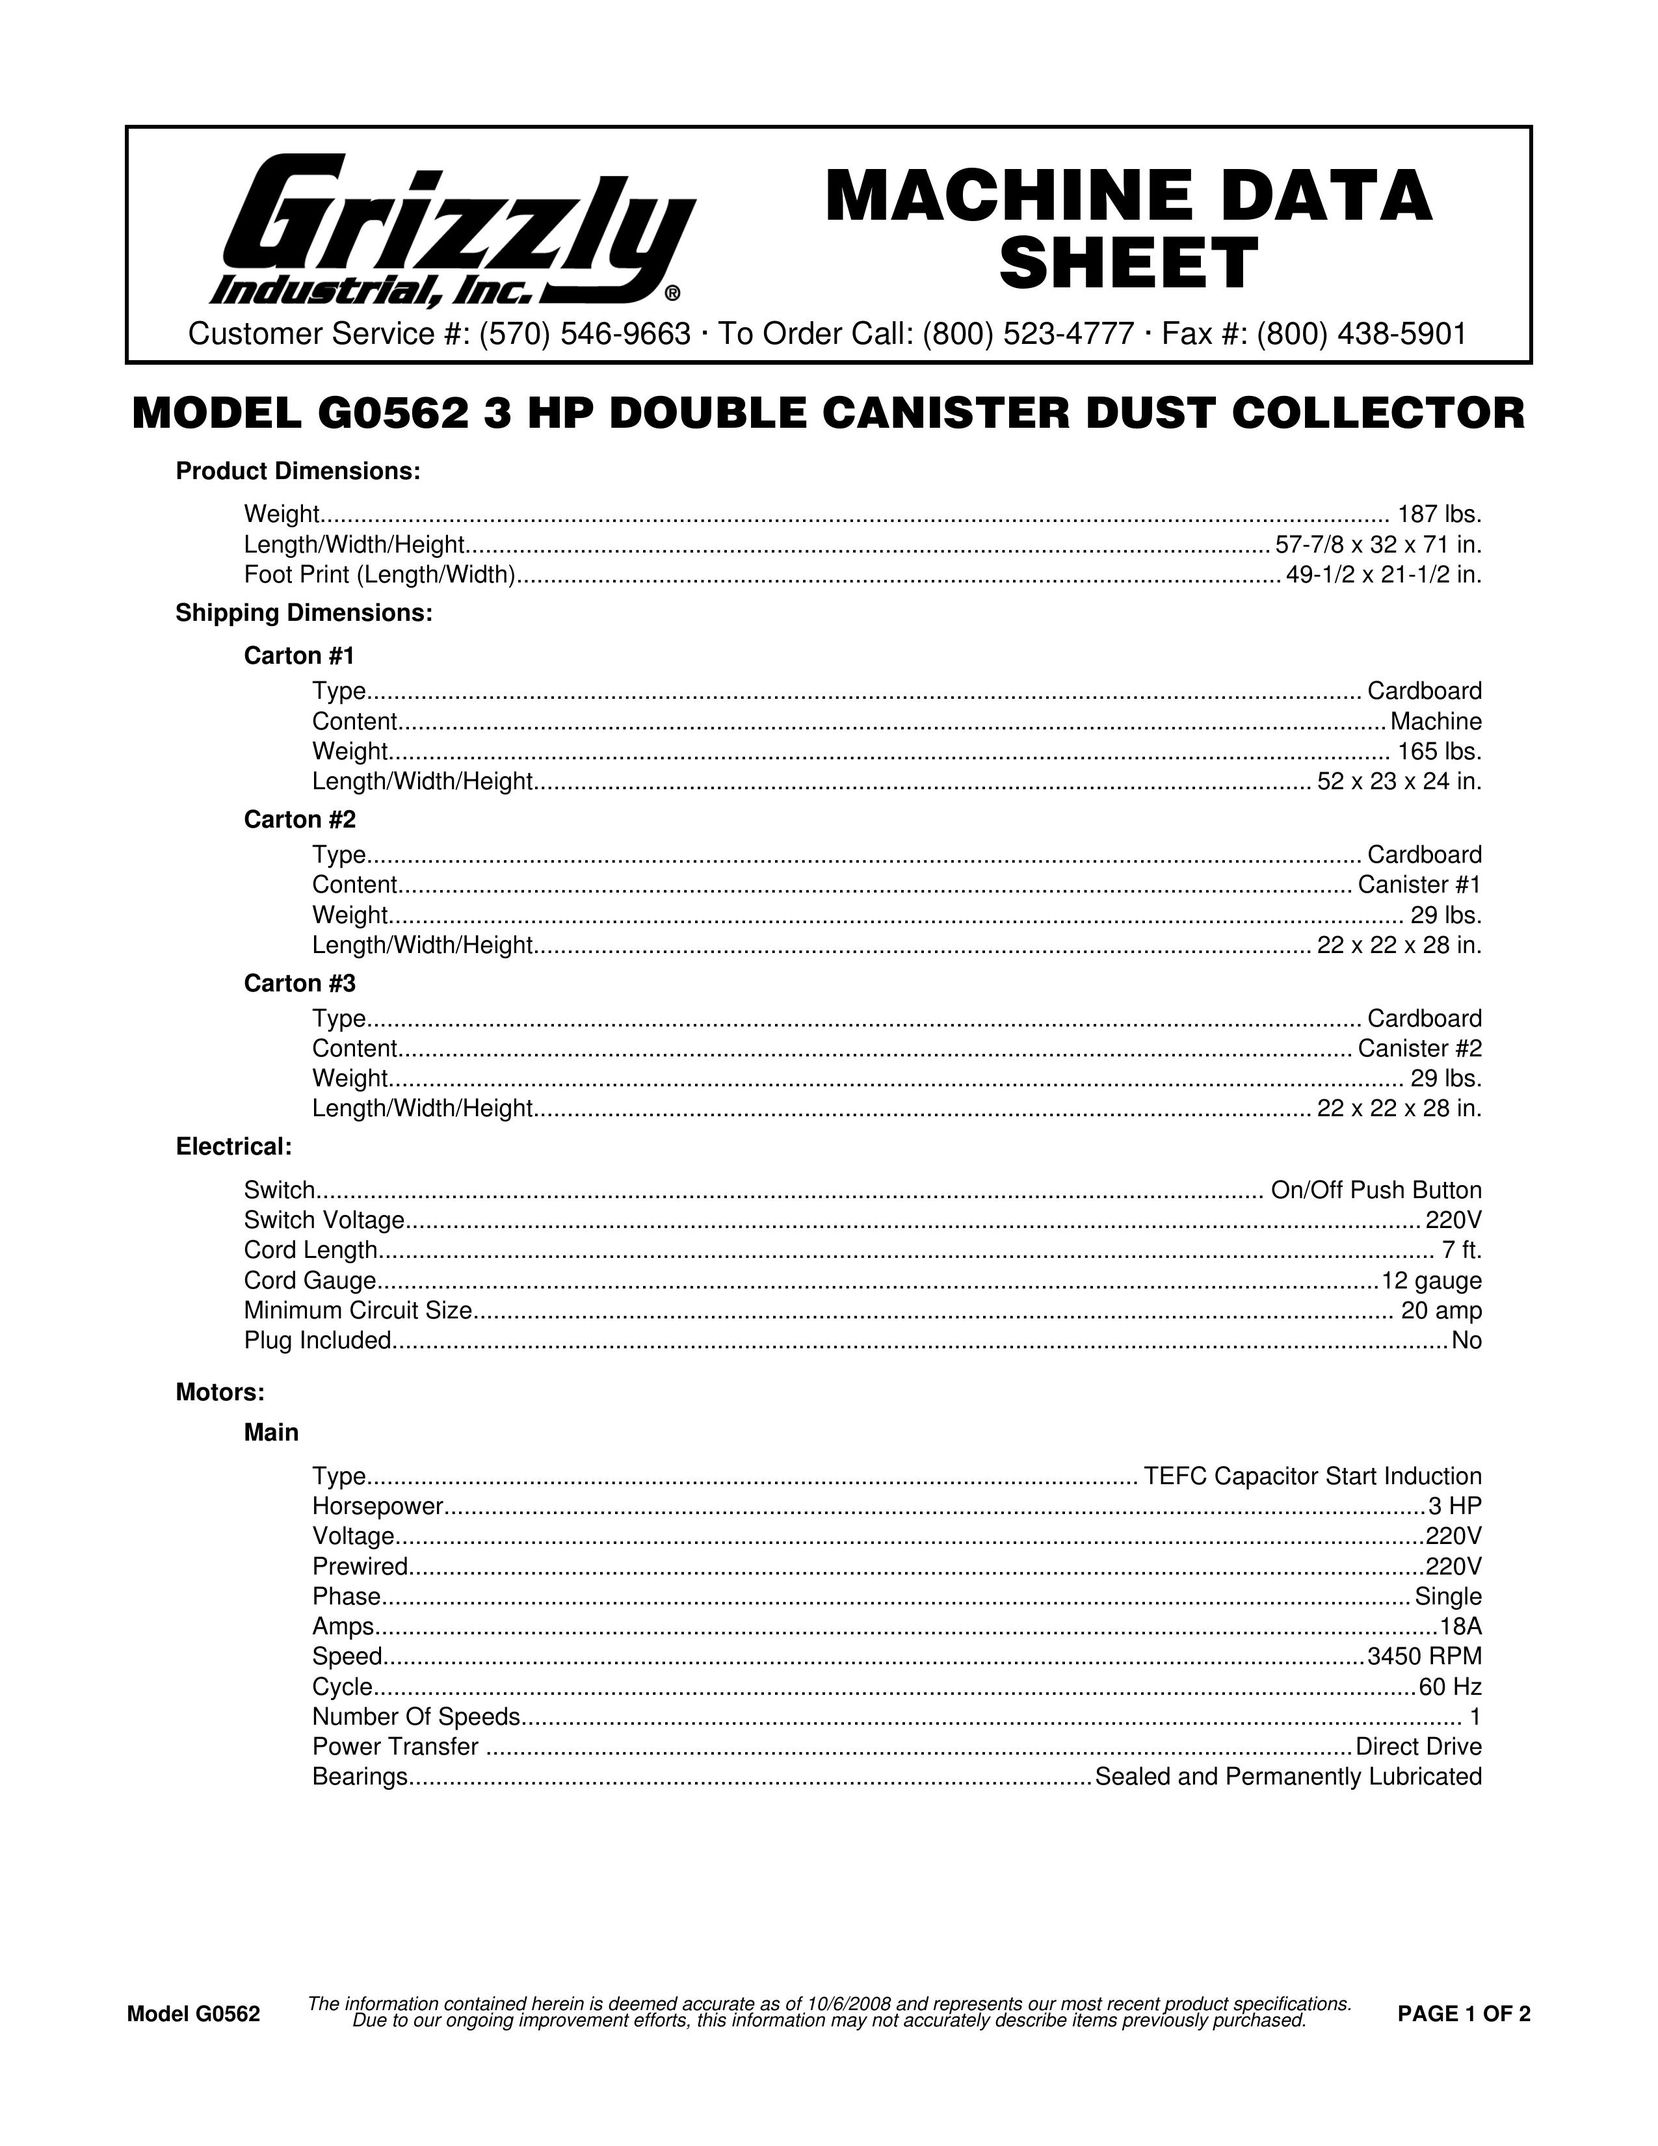 Grizzly G0562 Dust Collector User Manual